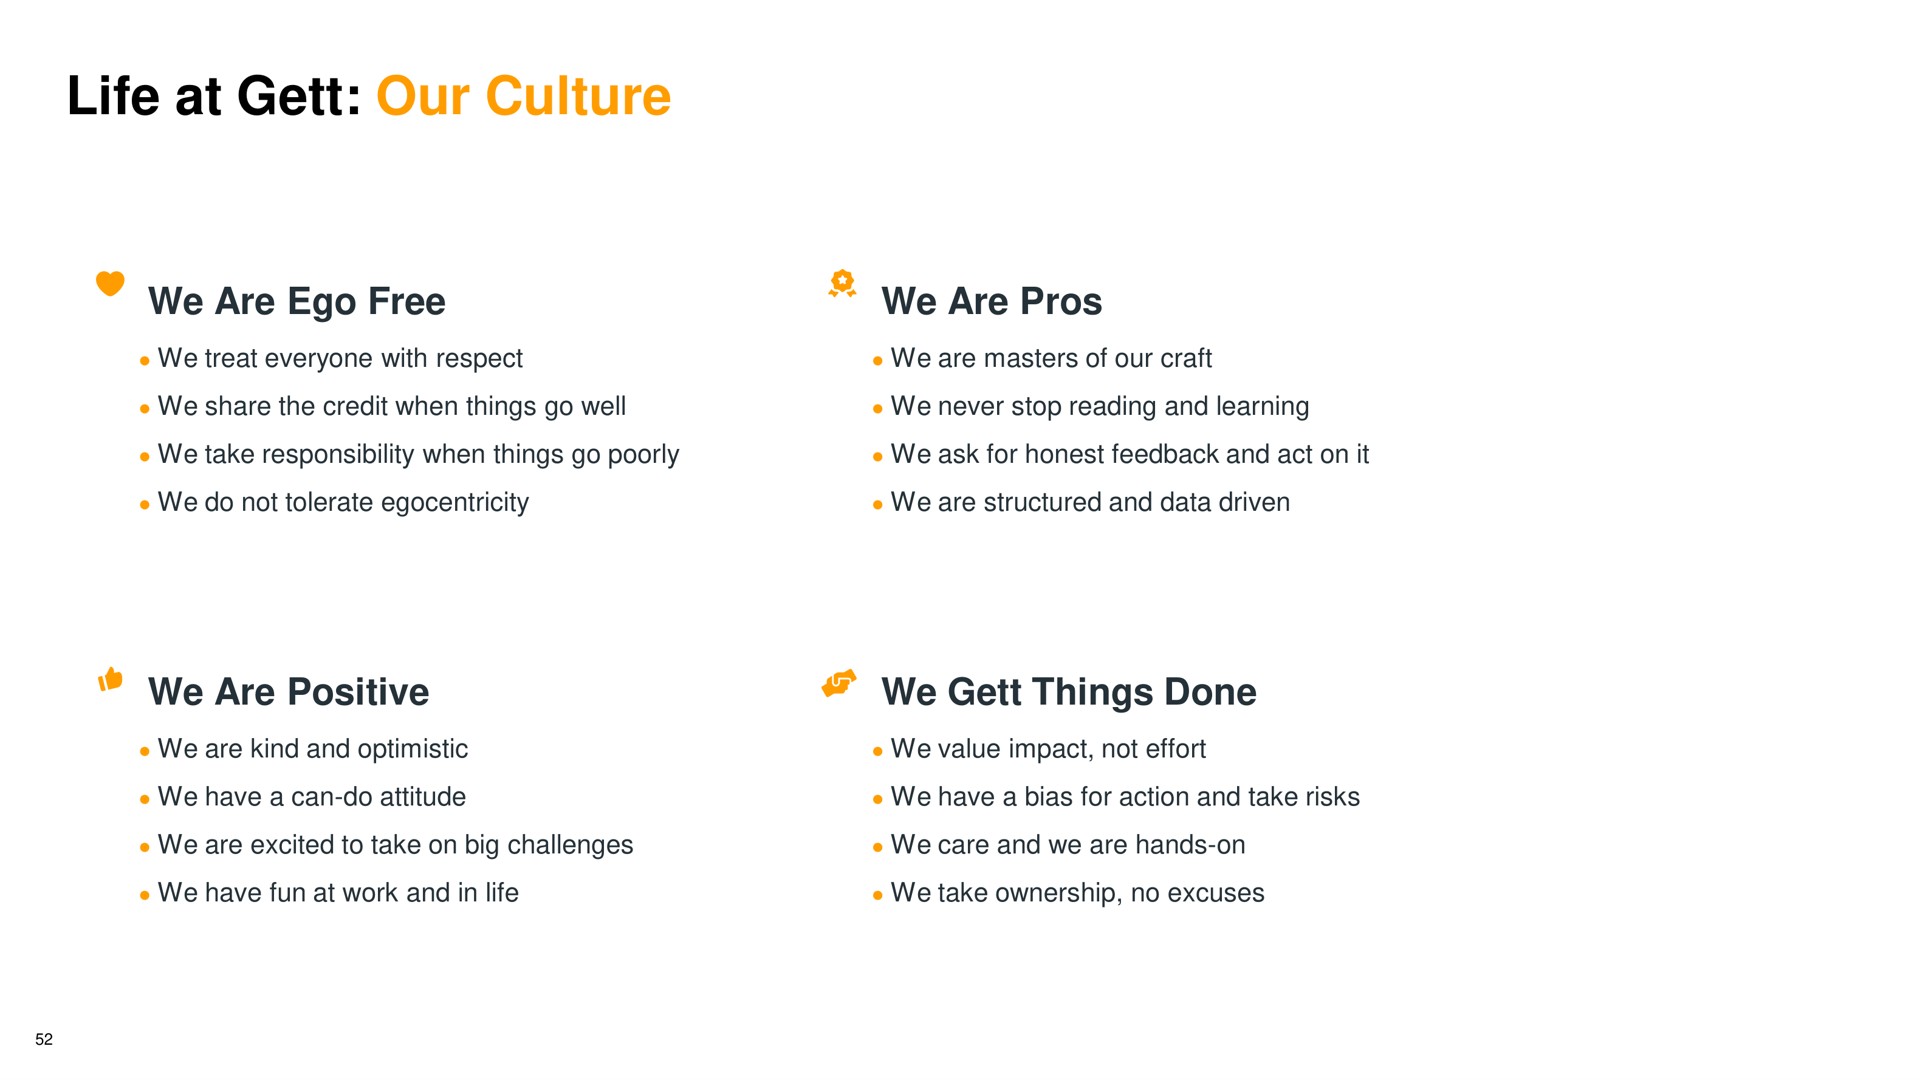 life at our culture | Gett